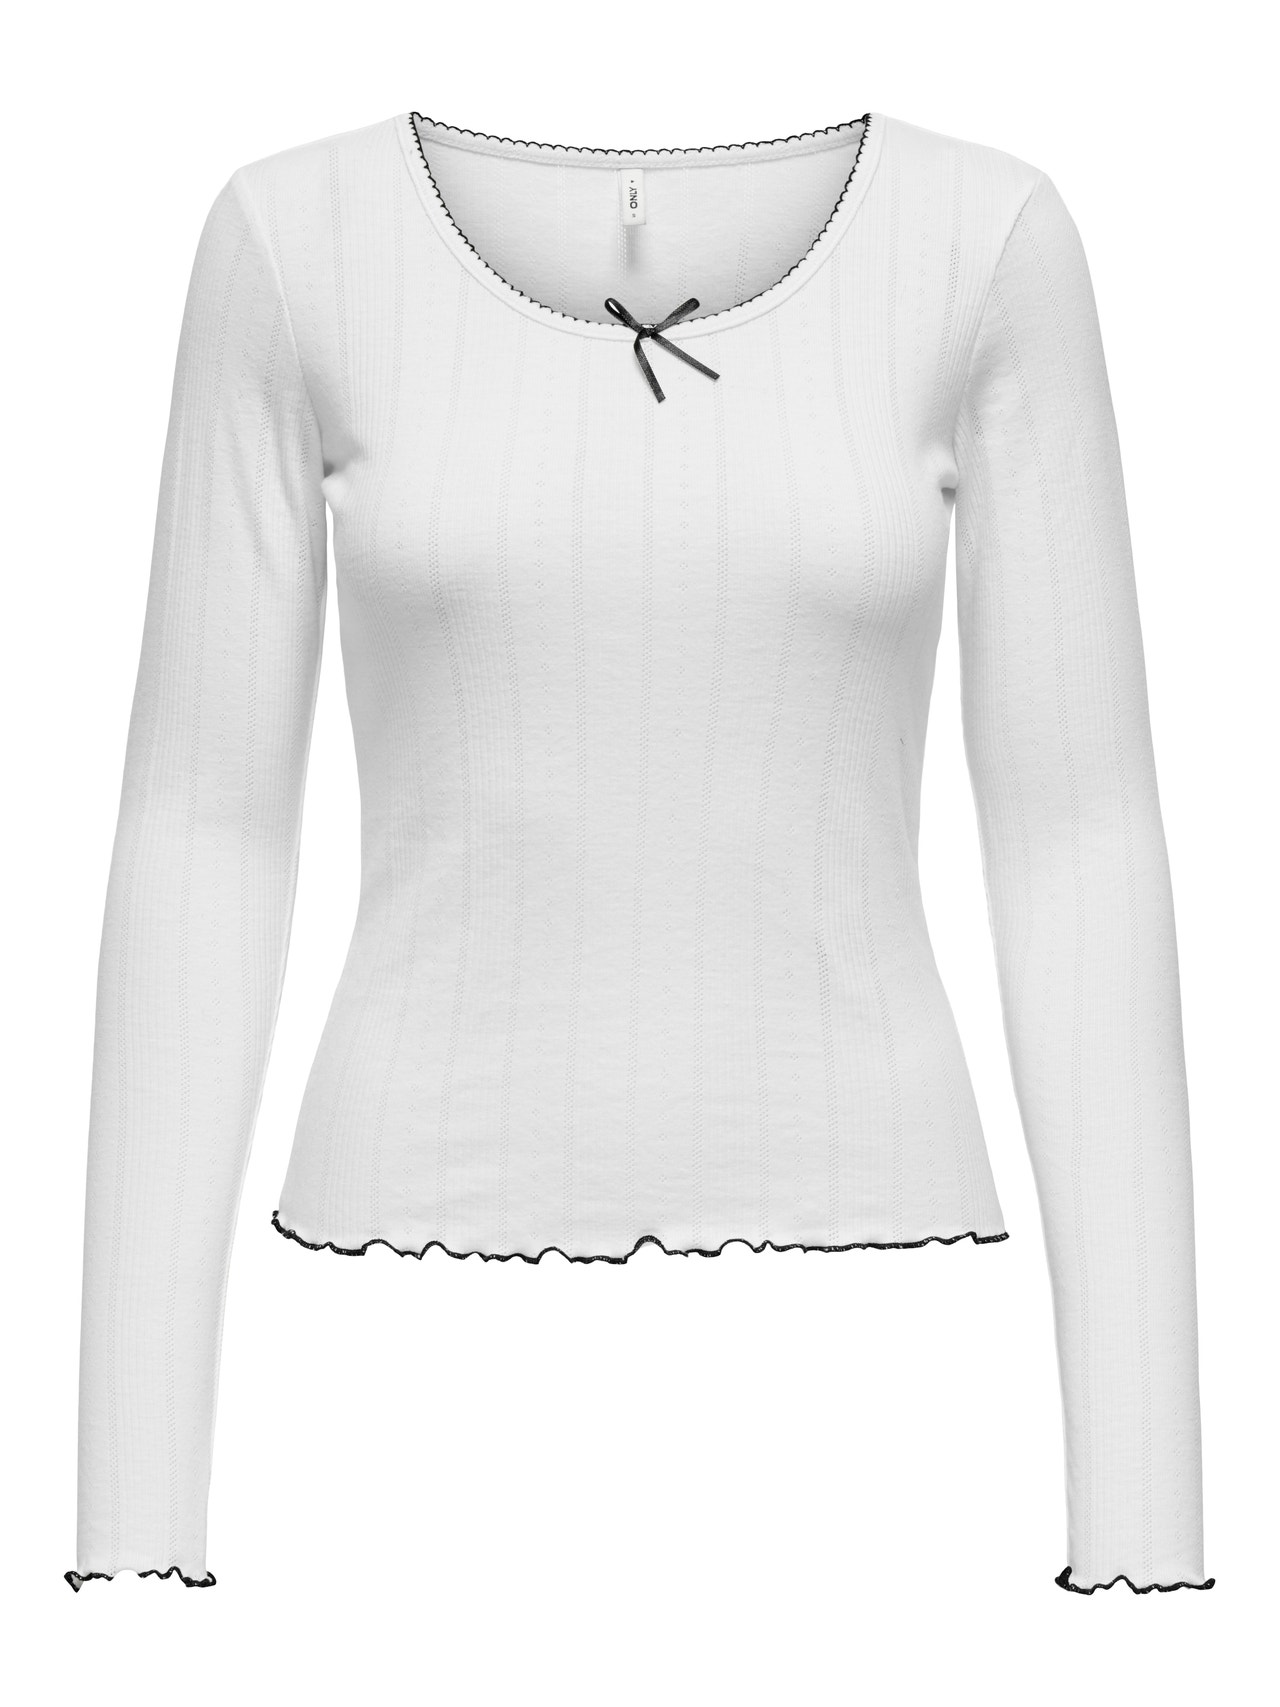 ONLY Regular Fit Round Neck Elasticated cuffs Top -White - 15343250